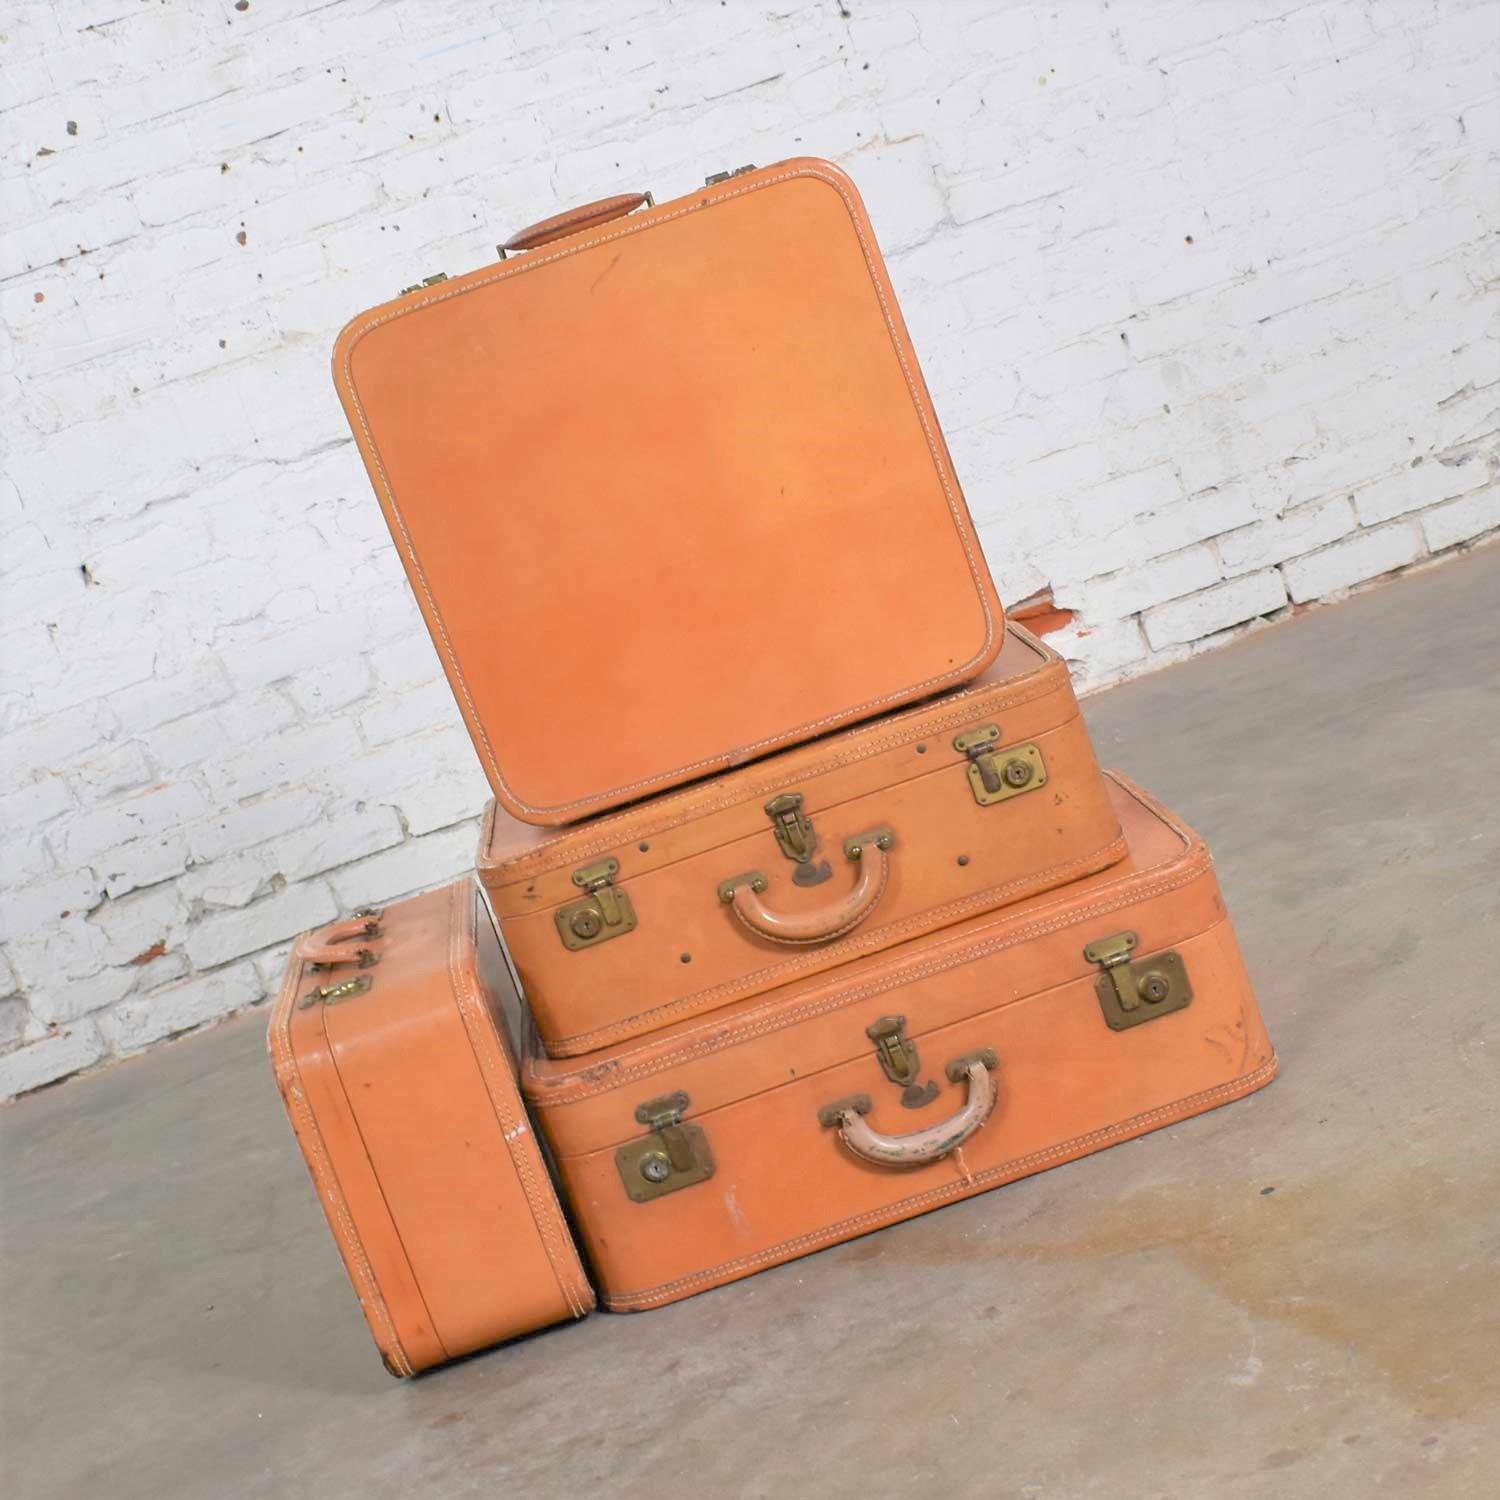 4 Stratosphere Rappaport Leather Suitcases Luggage as Side Tables End Tables 4